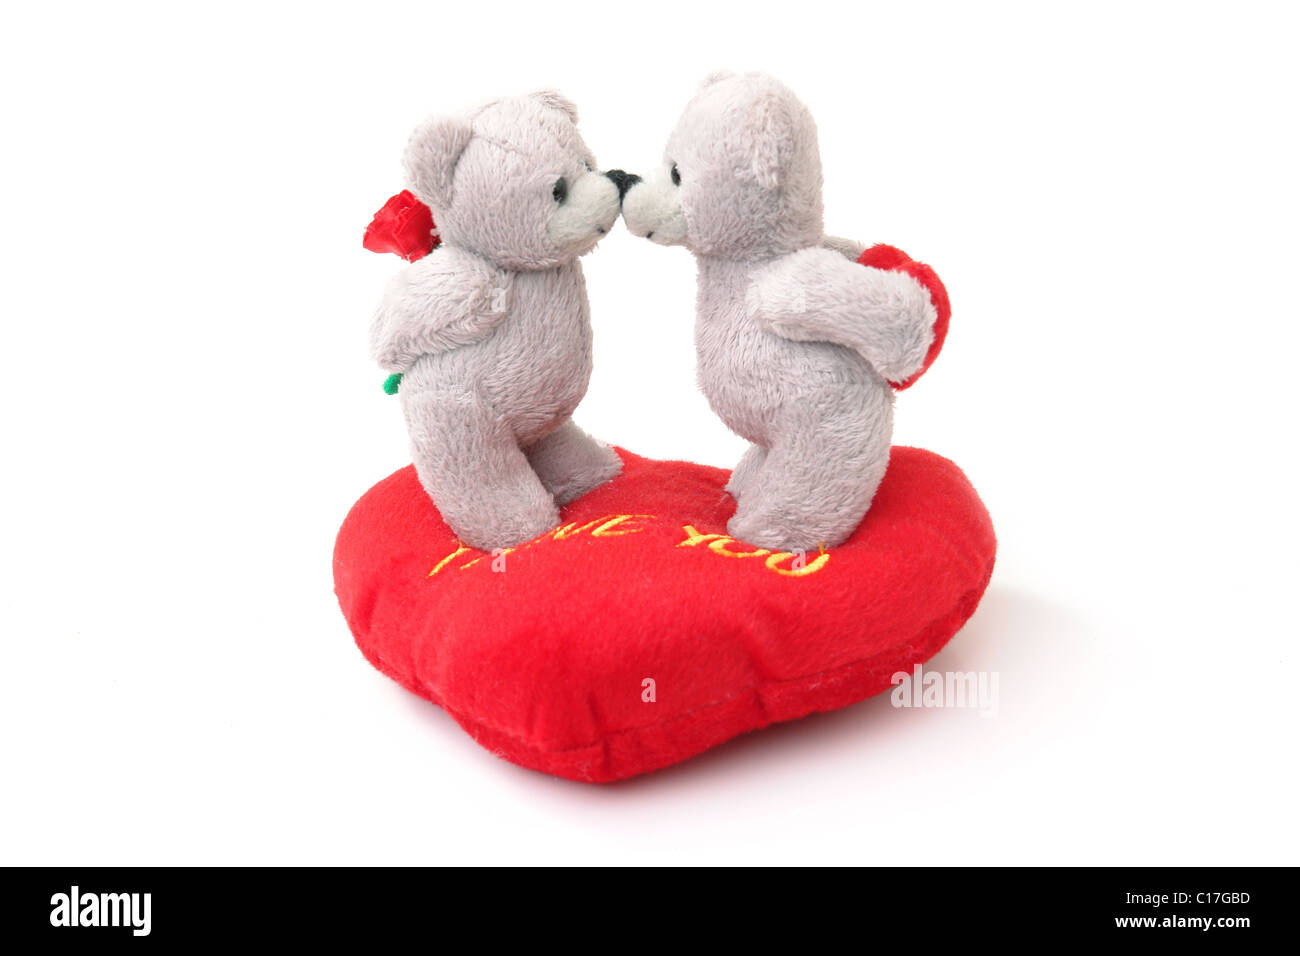 Two stuffed teddy bears kissing each other on stuffed heart-shaped pillow over white background Stock Photo